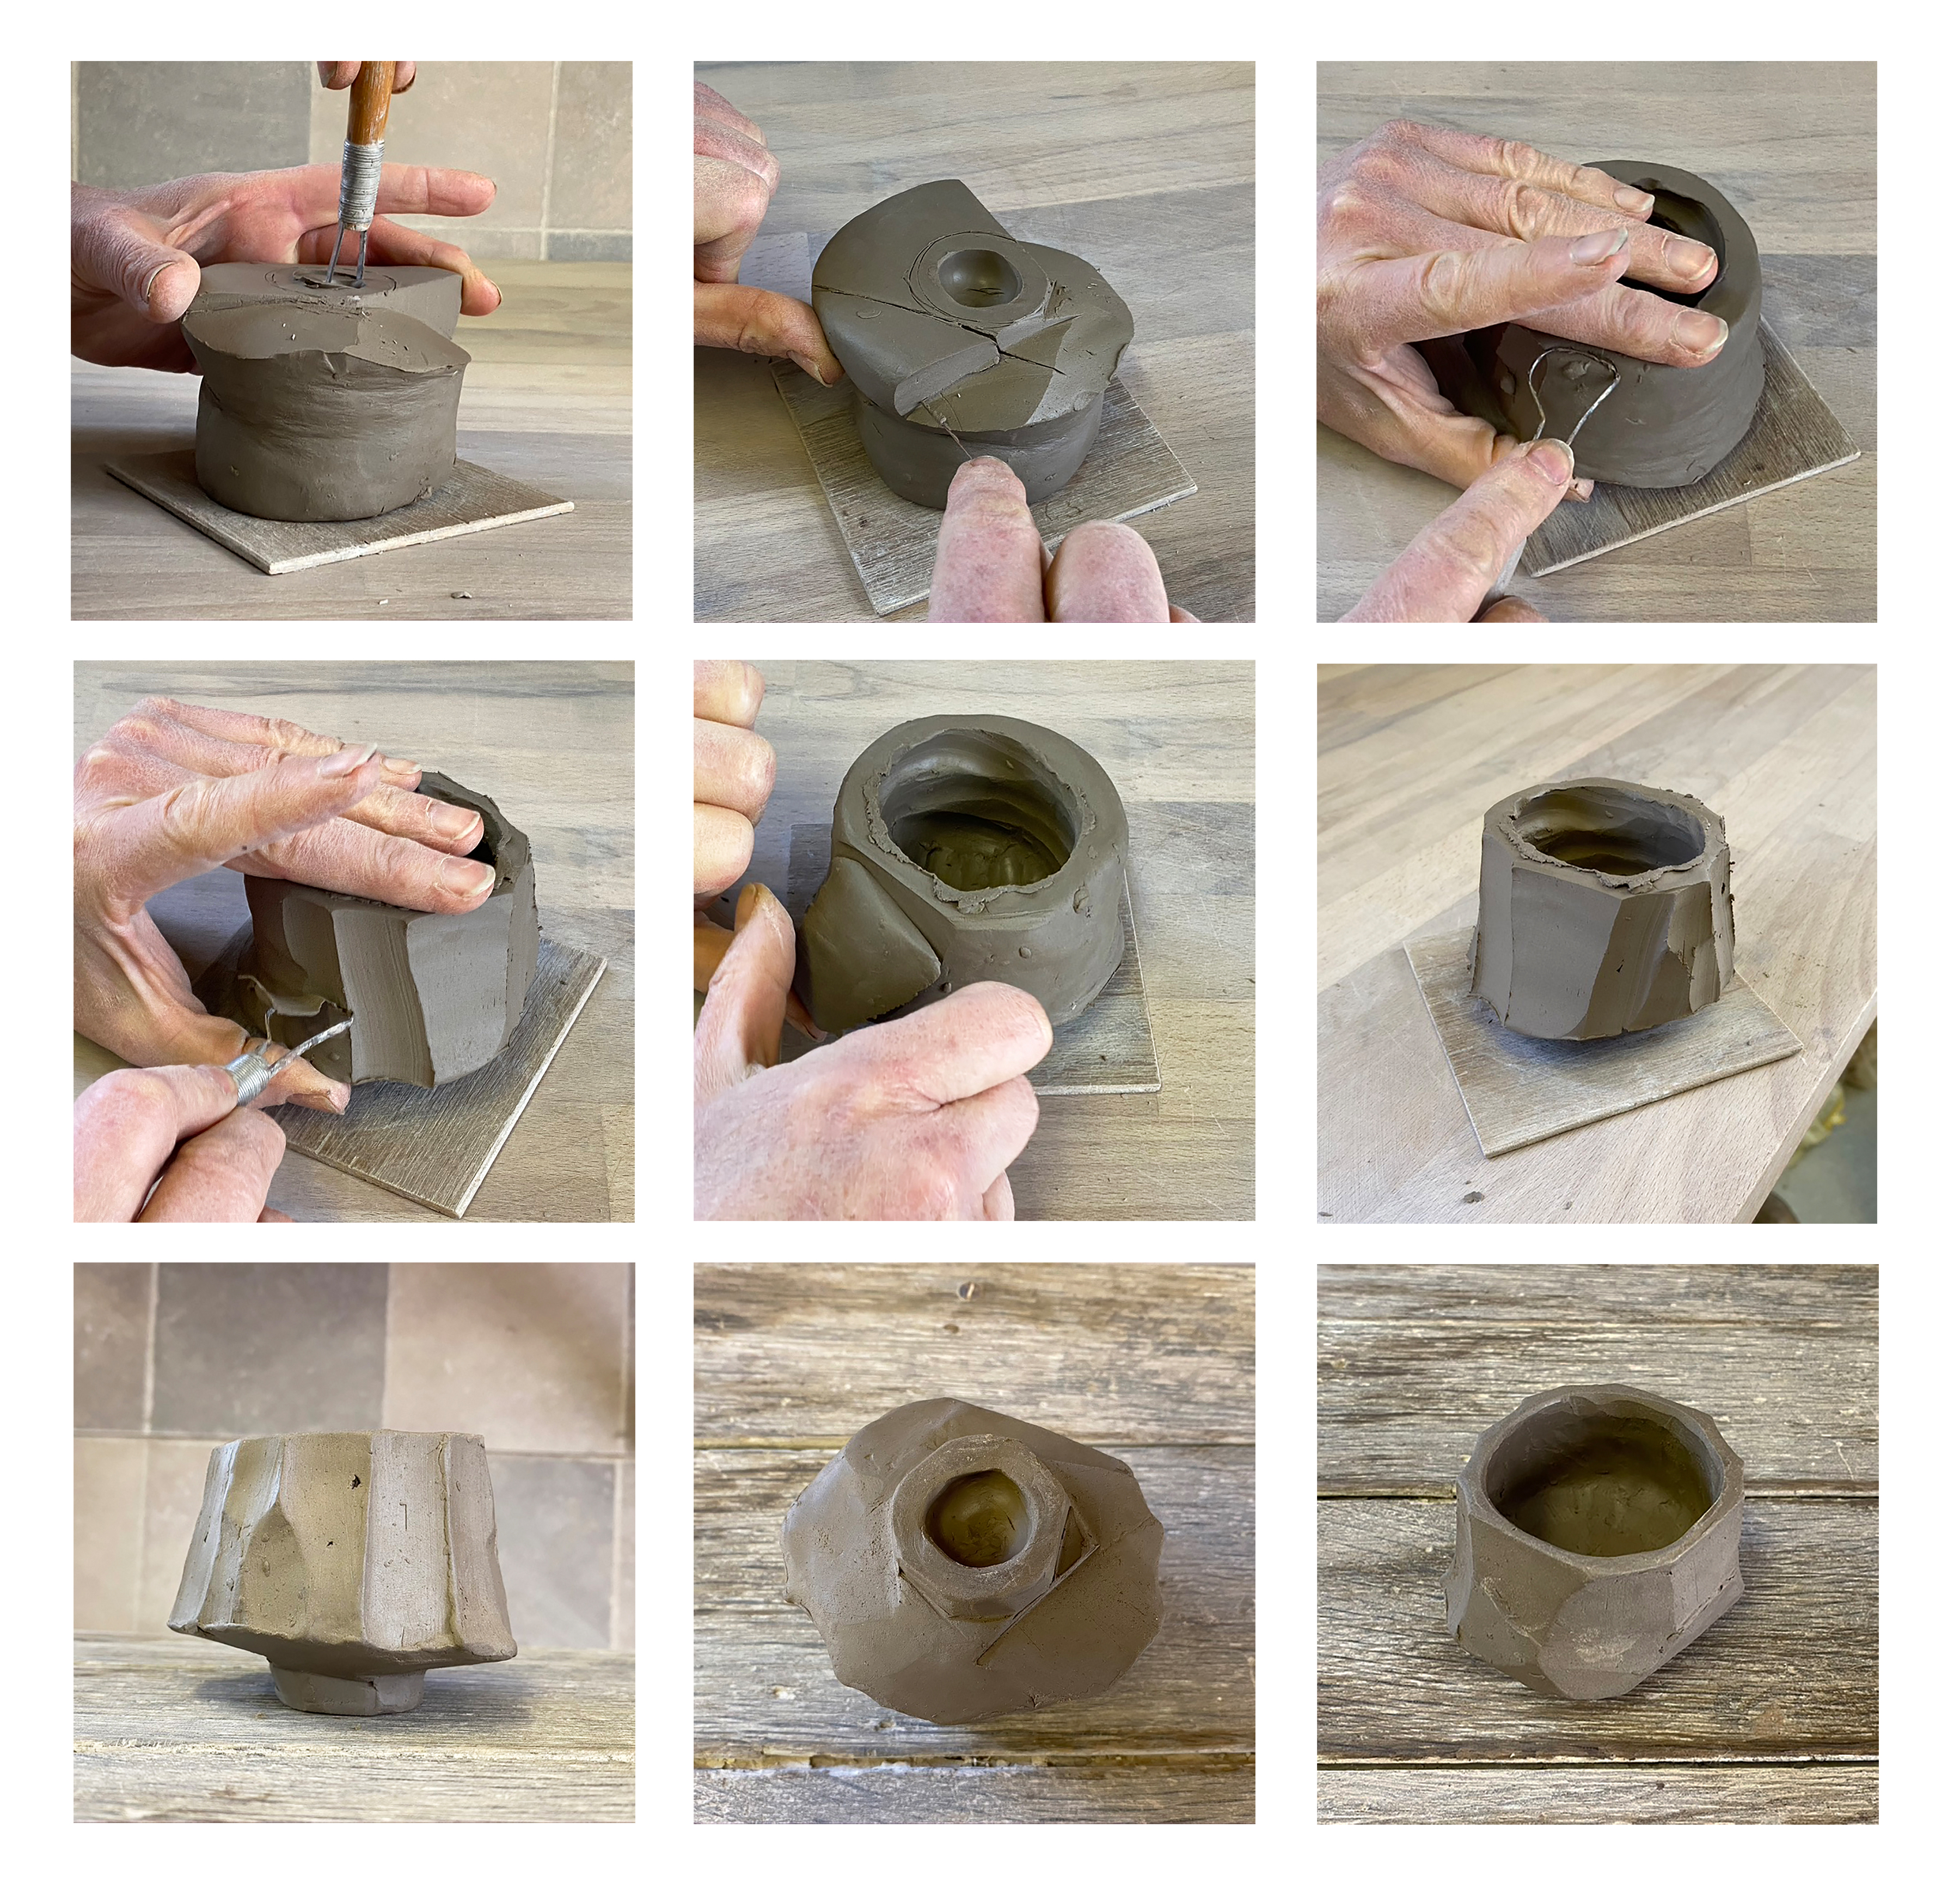 How to centre clay - The one sided method. Beginners Guide